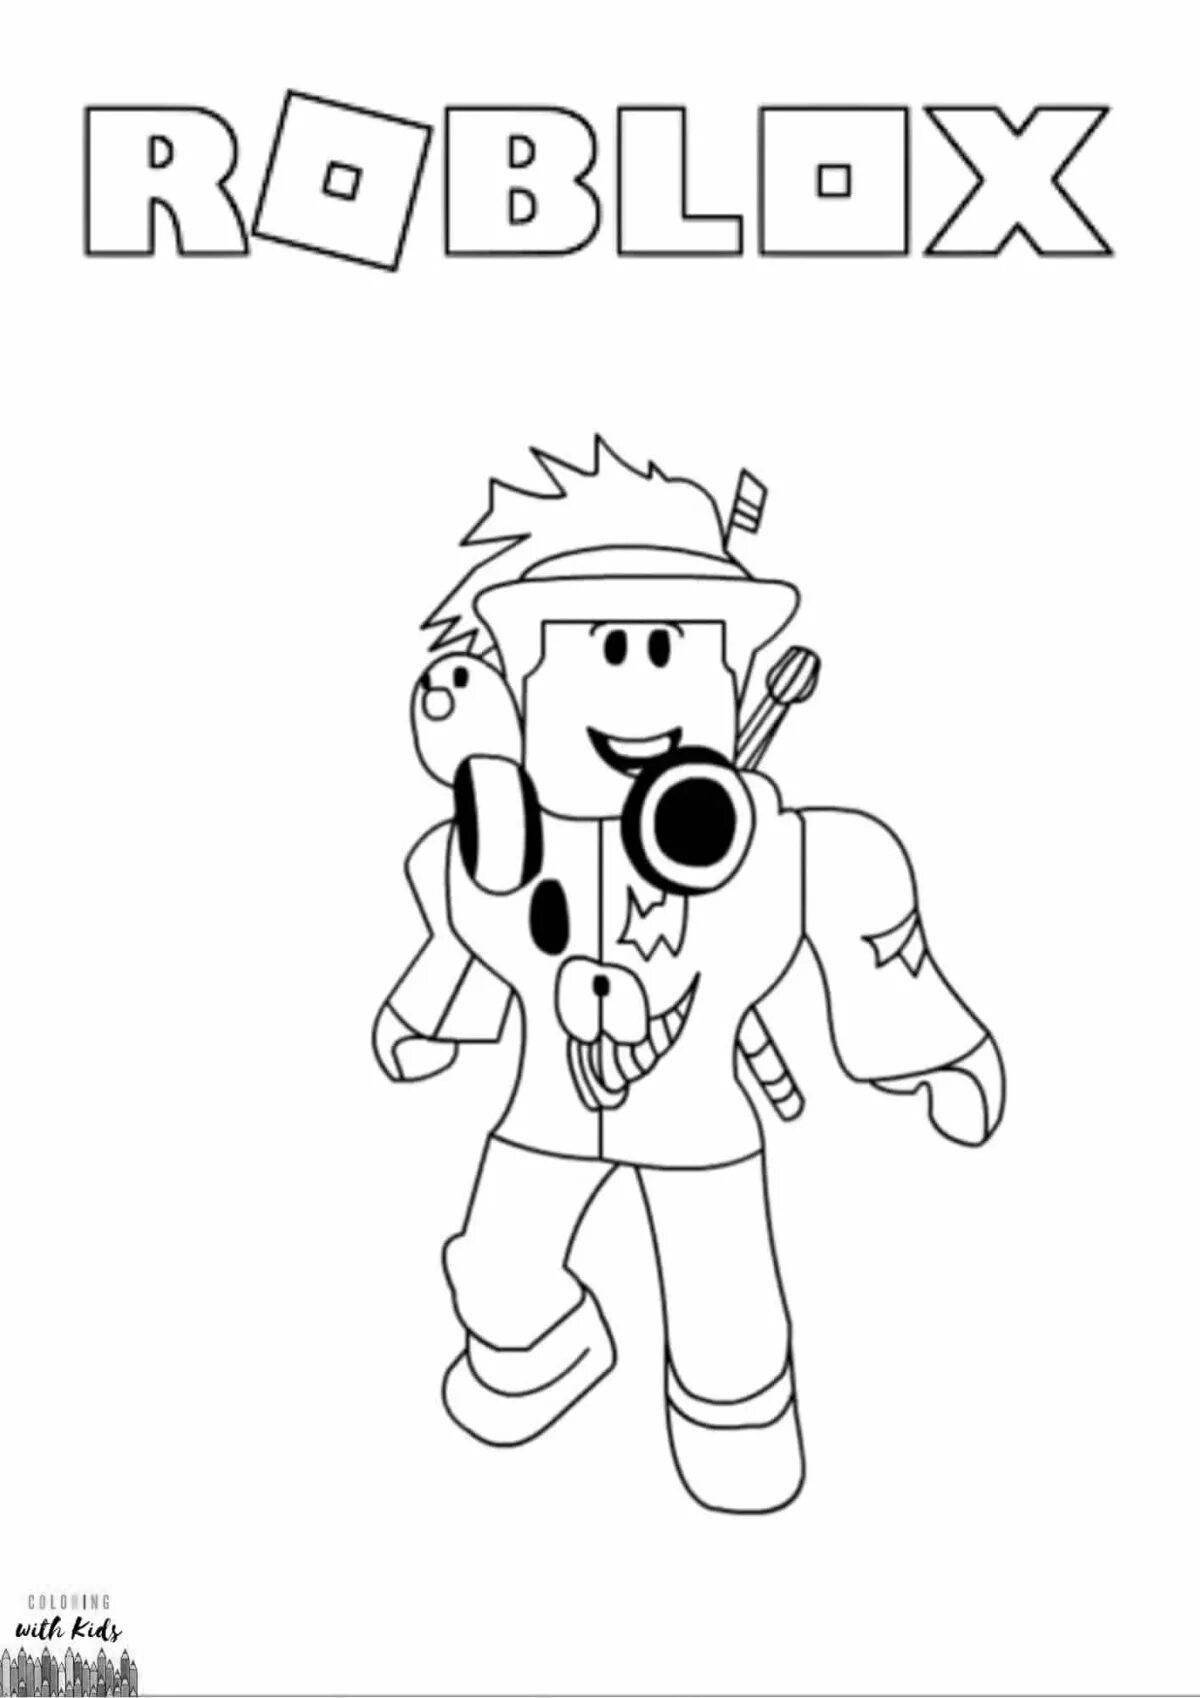 Playful roblox body coloring page